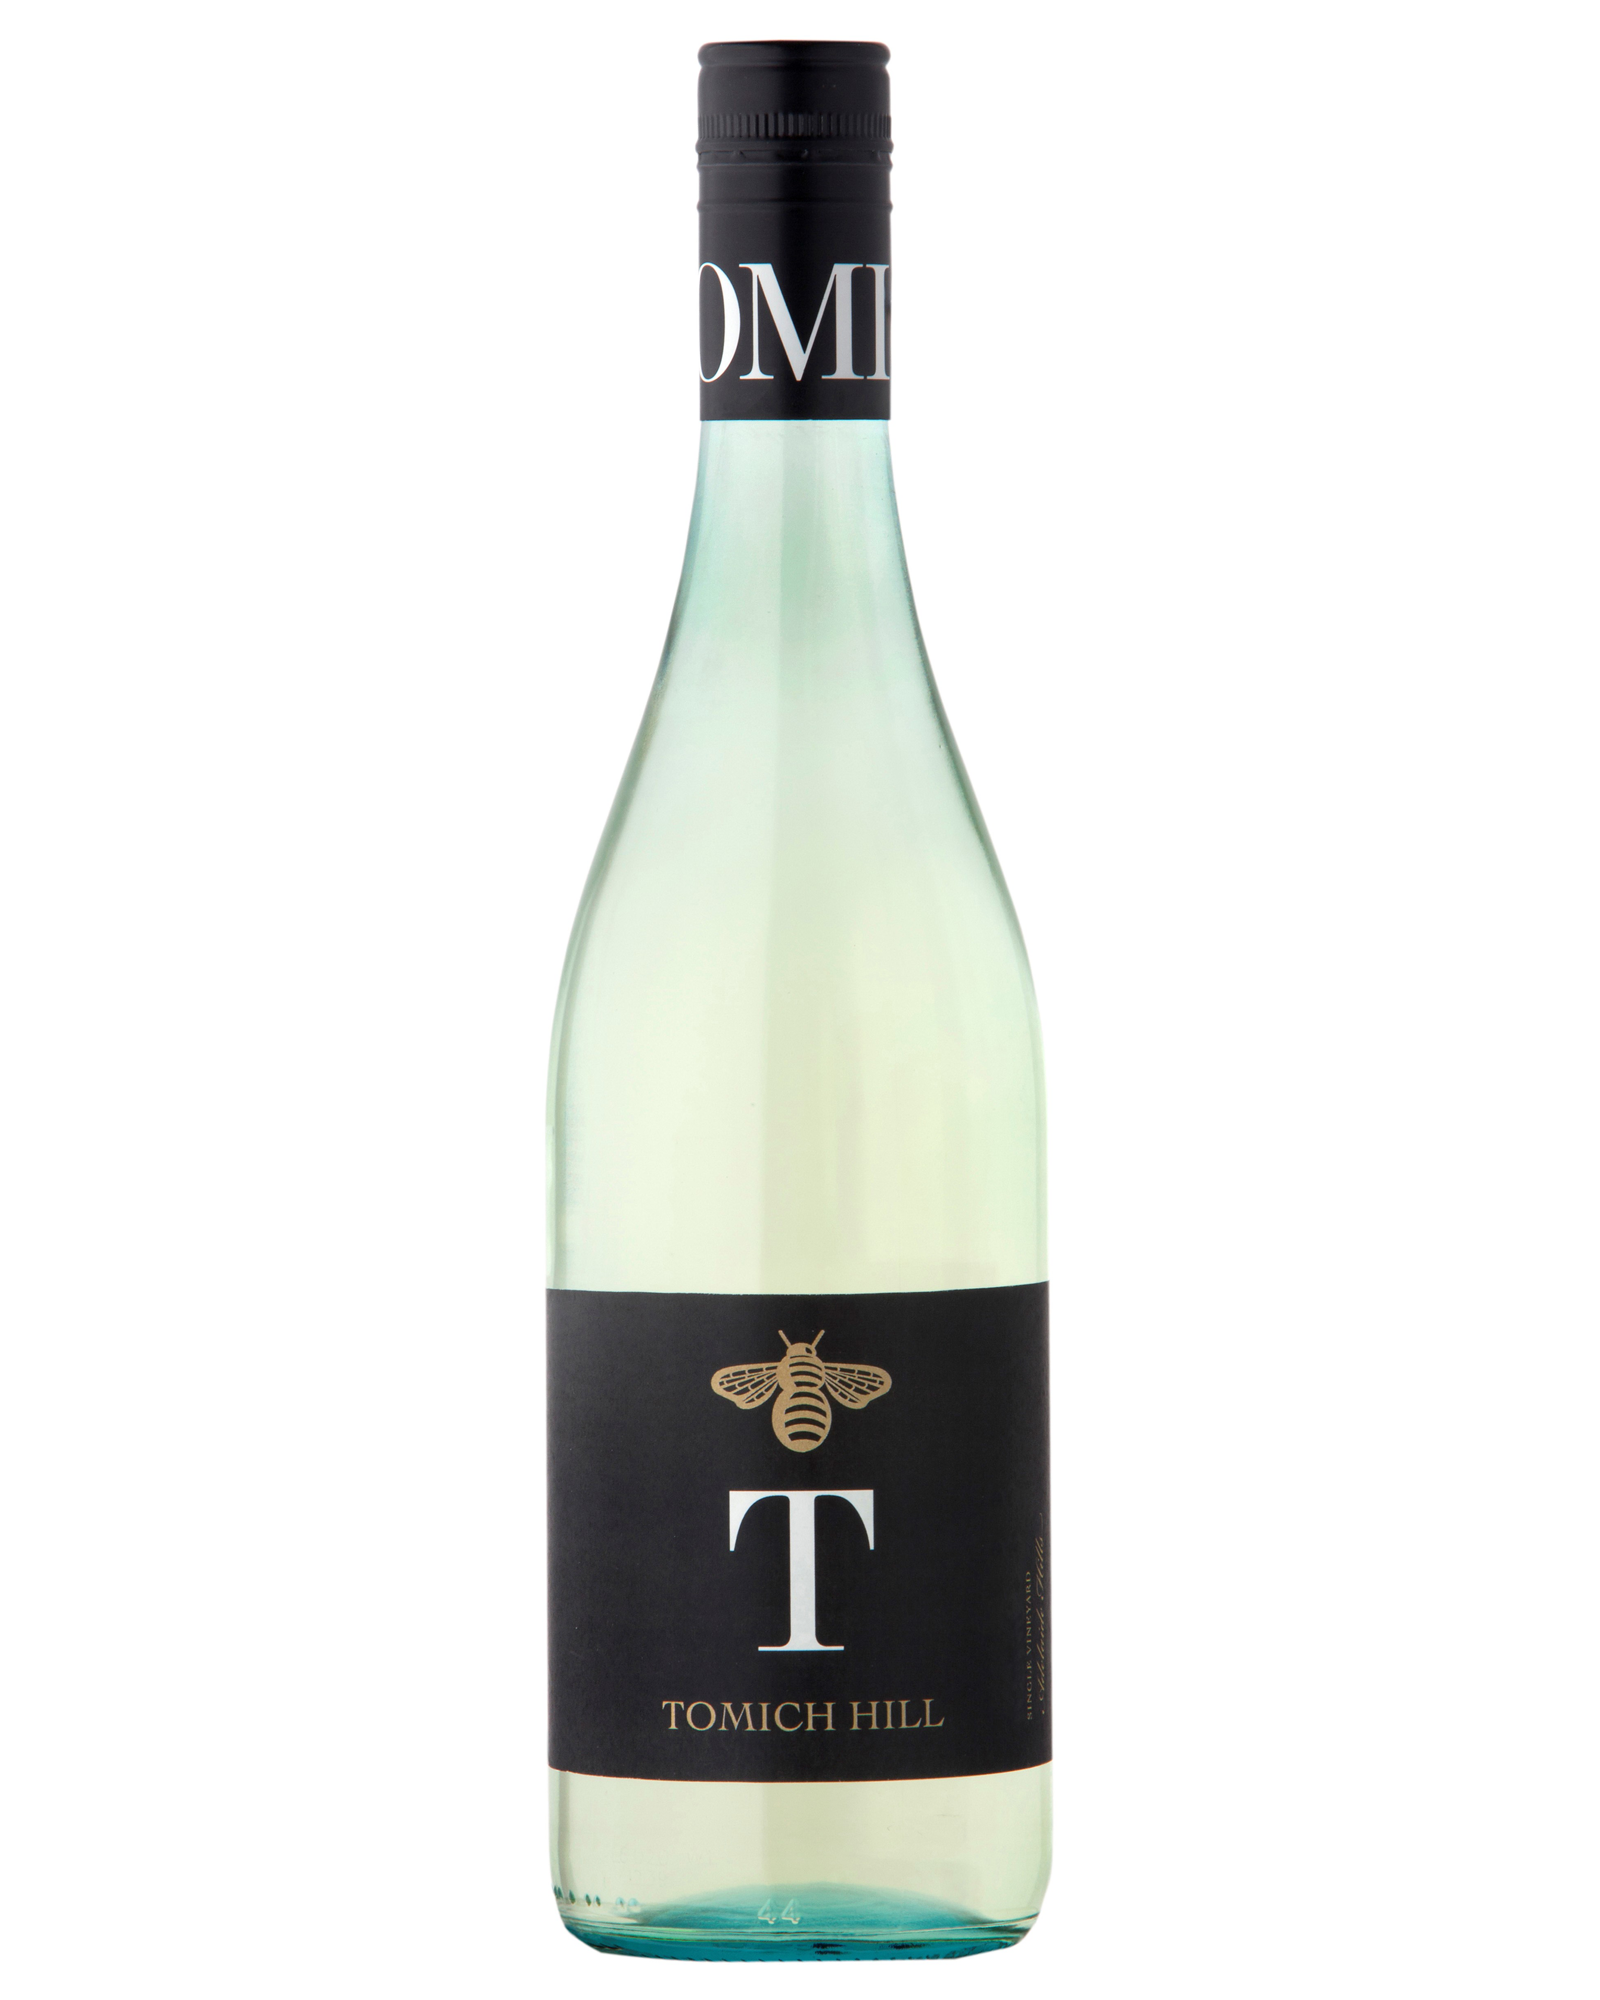 Tomich Hill Adelaide Hills Pinot Grigio